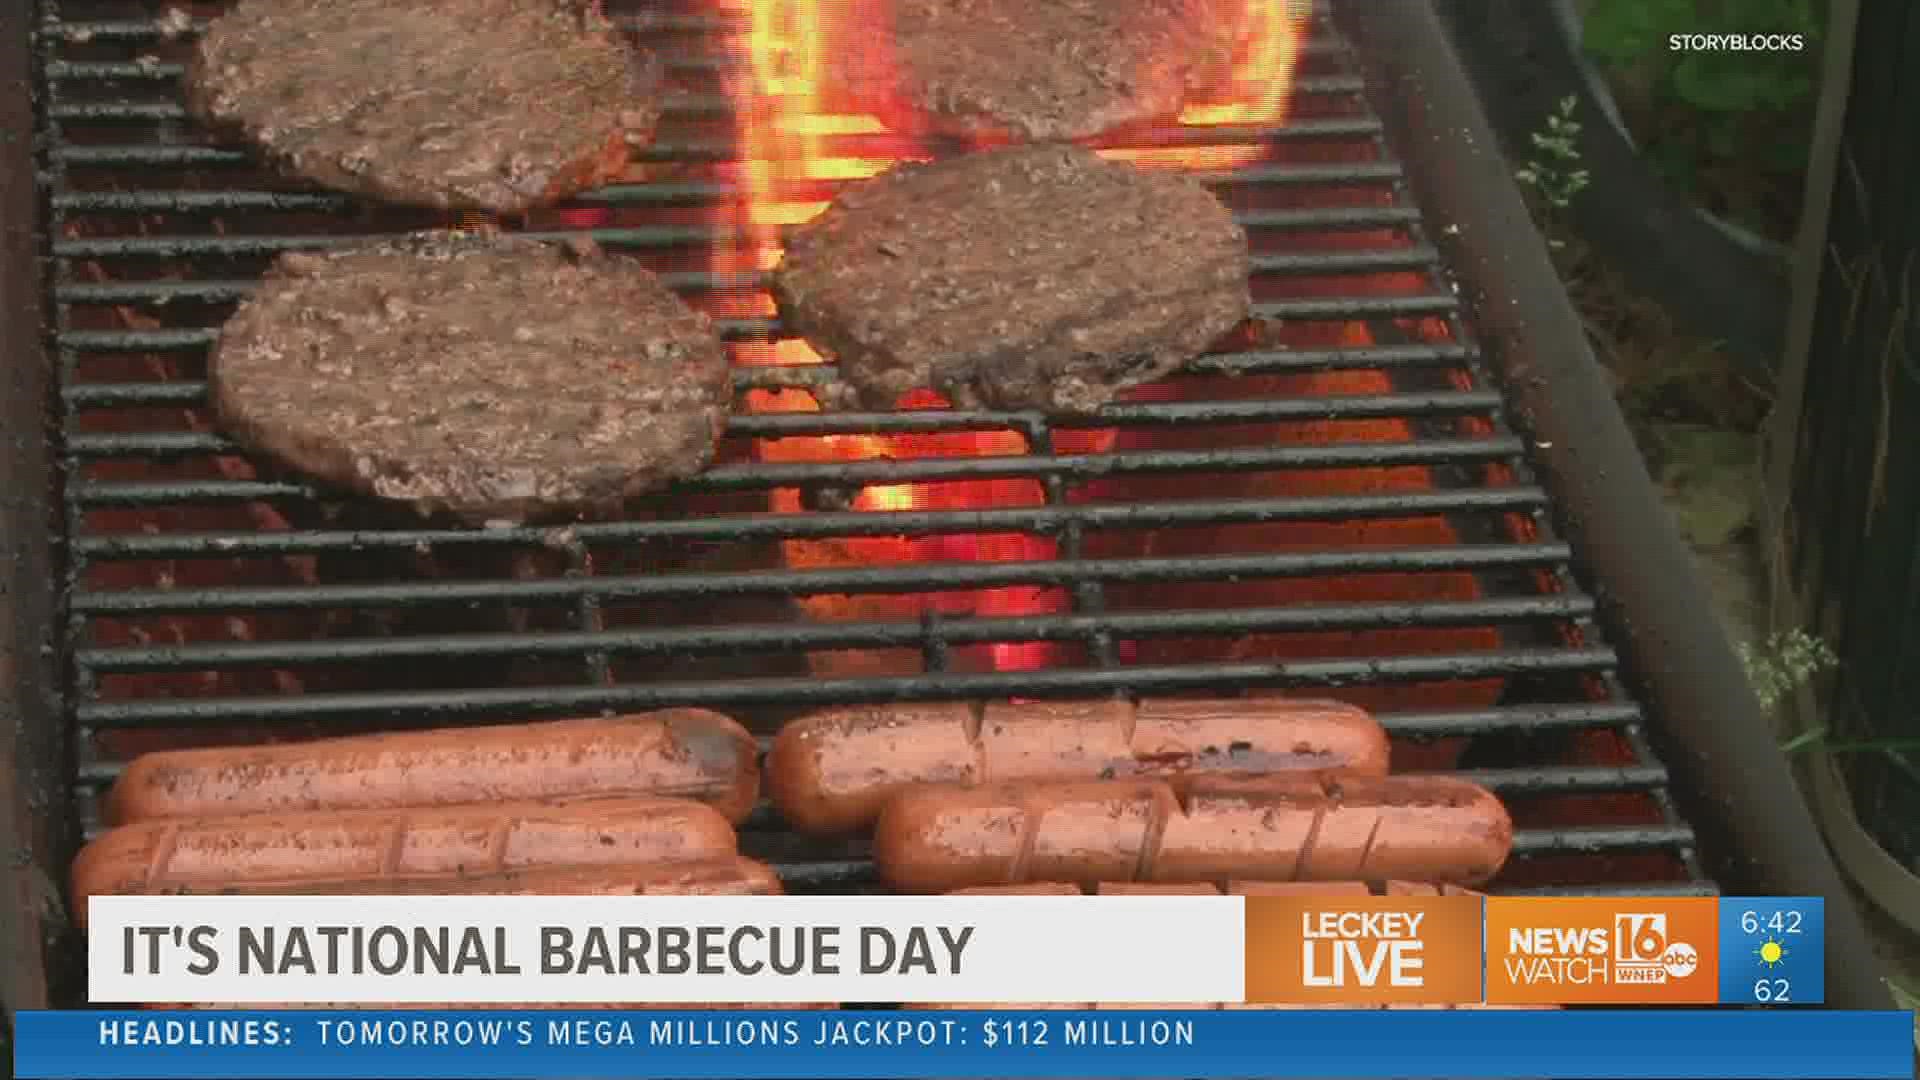 Whether you’re a natural-born griller or an amateur, Monday, May 16, 2022, is a great day to get your grillin’ on.